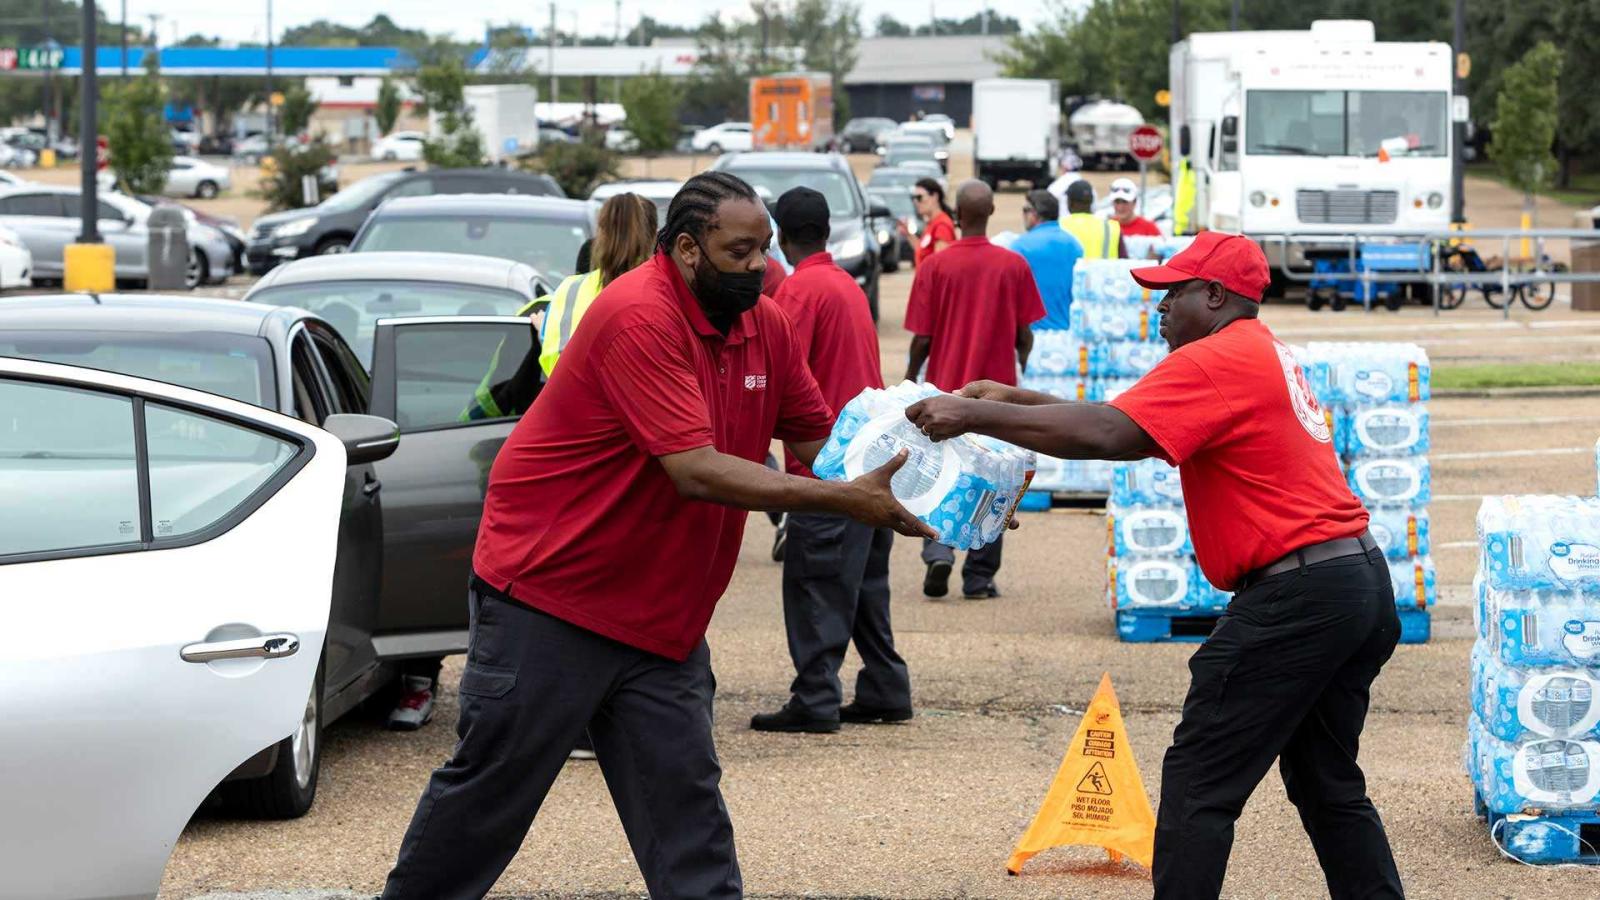 A man giving a pack of water to another man. Both are wearing red.